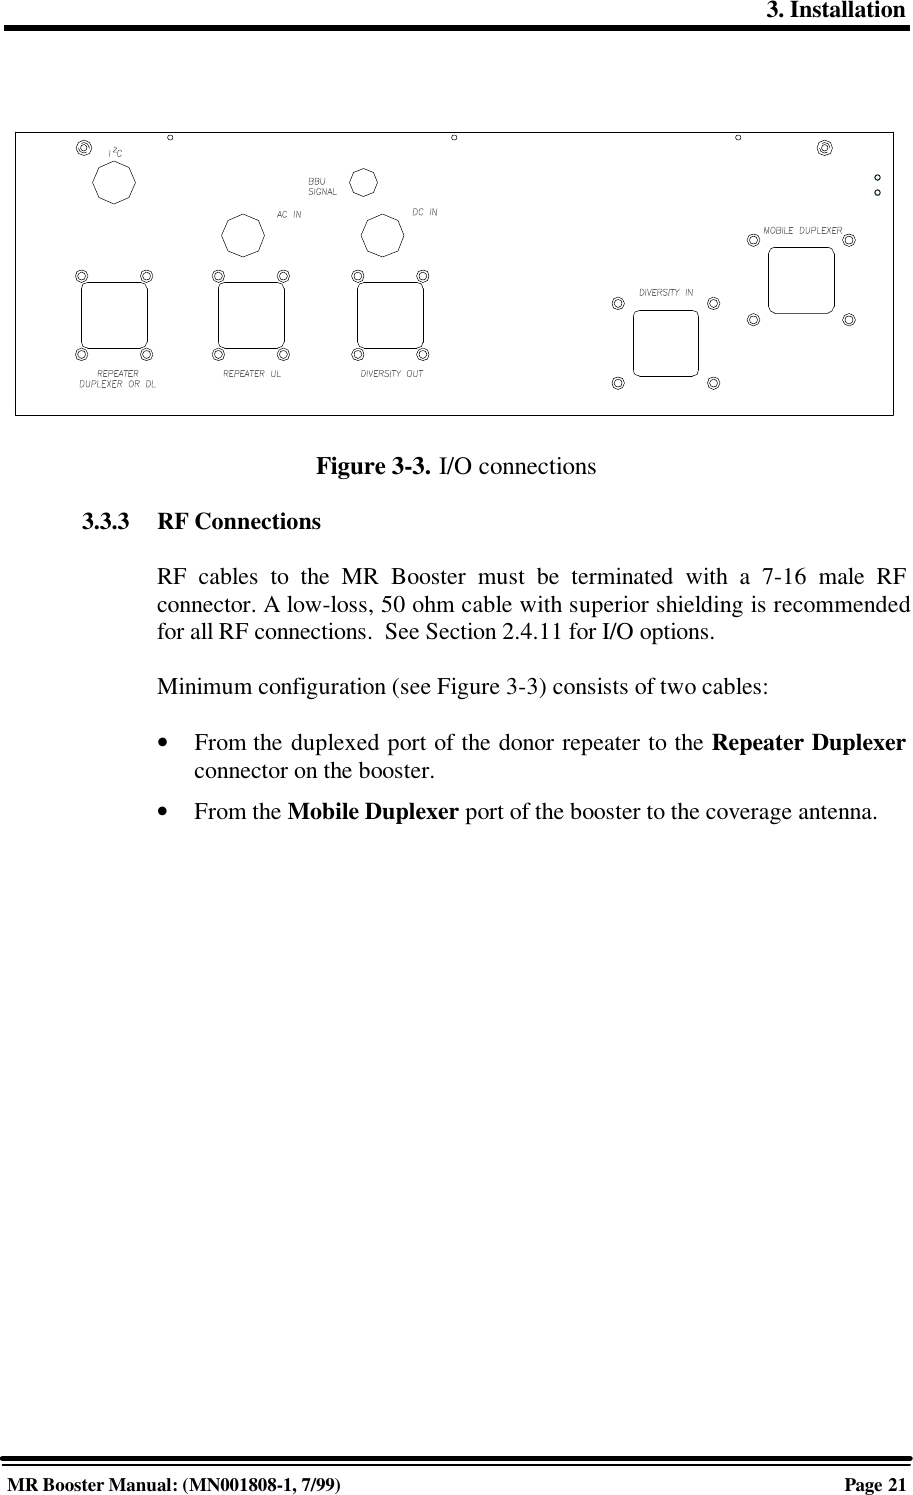 3. InstallationMR Booster Manual: (MN001808-1, 7/99)Page 21Figure 3-3. I/O connections3.3.3 RF ConnectionsRF cables to the MR Booster must be terminated with a 7-16 male RFconnector. A low-loss, 50 ohm cable with superior shielding is recommendedfor all RF connections.  See Section 2.4.11 for I/O options.Minimum configuration (see Figure 3-3) consists of two cables:• From the duplexed port of the donor repeater to the Repeater Duplexerconnector on the booster.• From the Mobile Duplexer port of the booster to the coverage antenna.